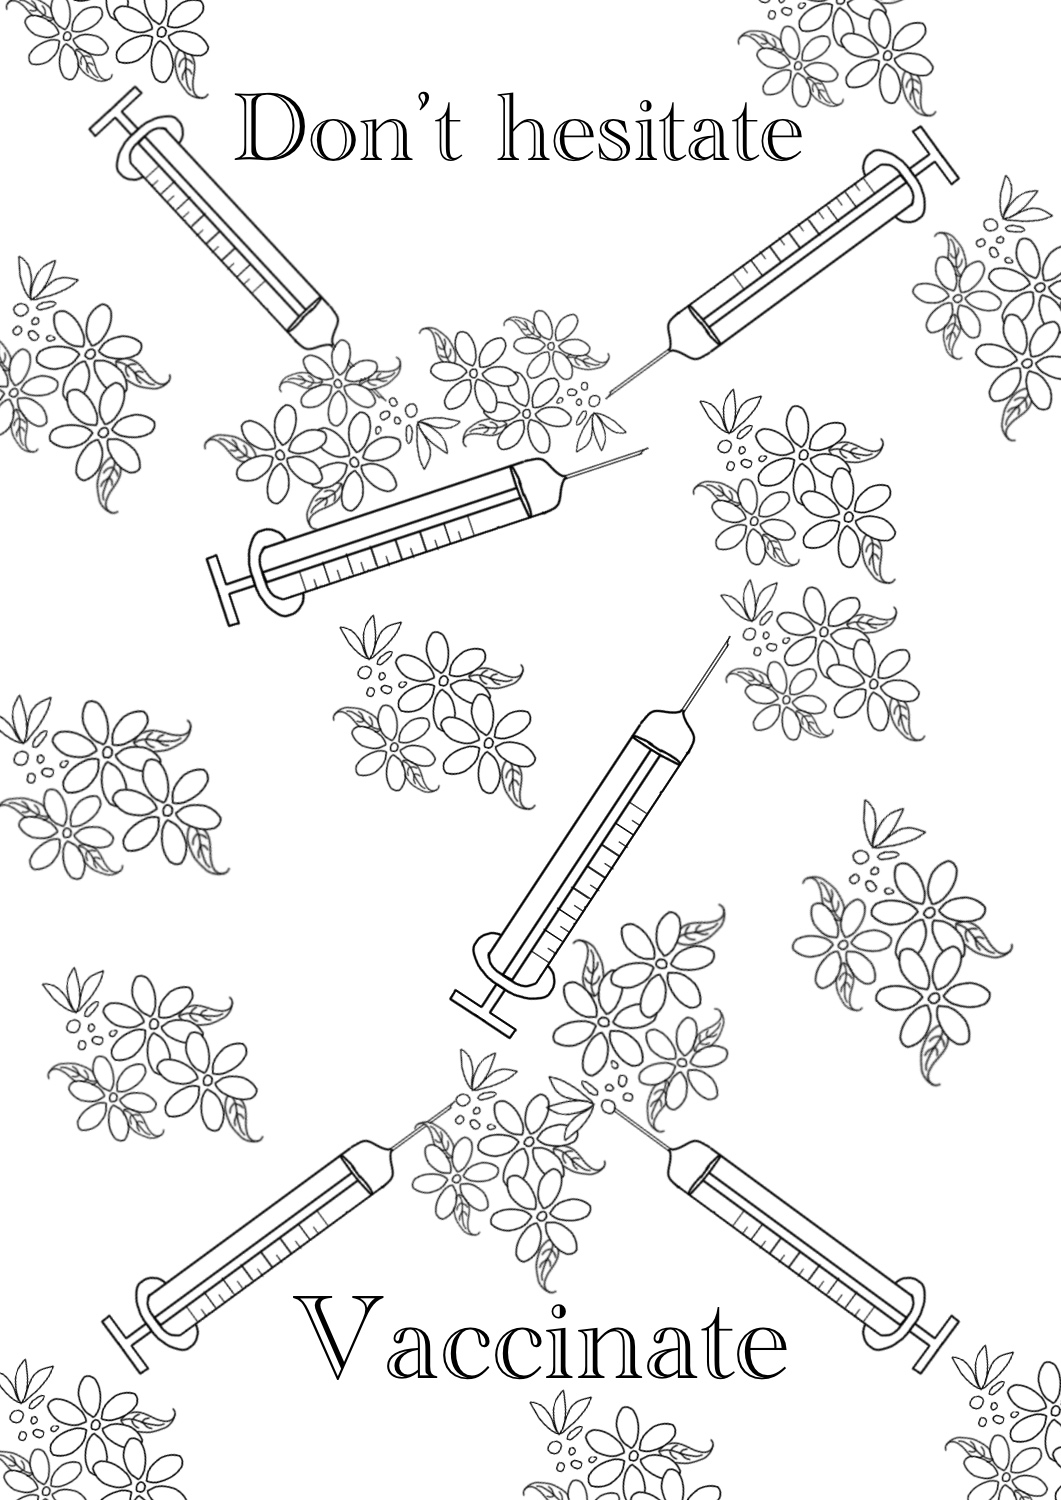 Vaccinate don’t hesitate coloring page for kids